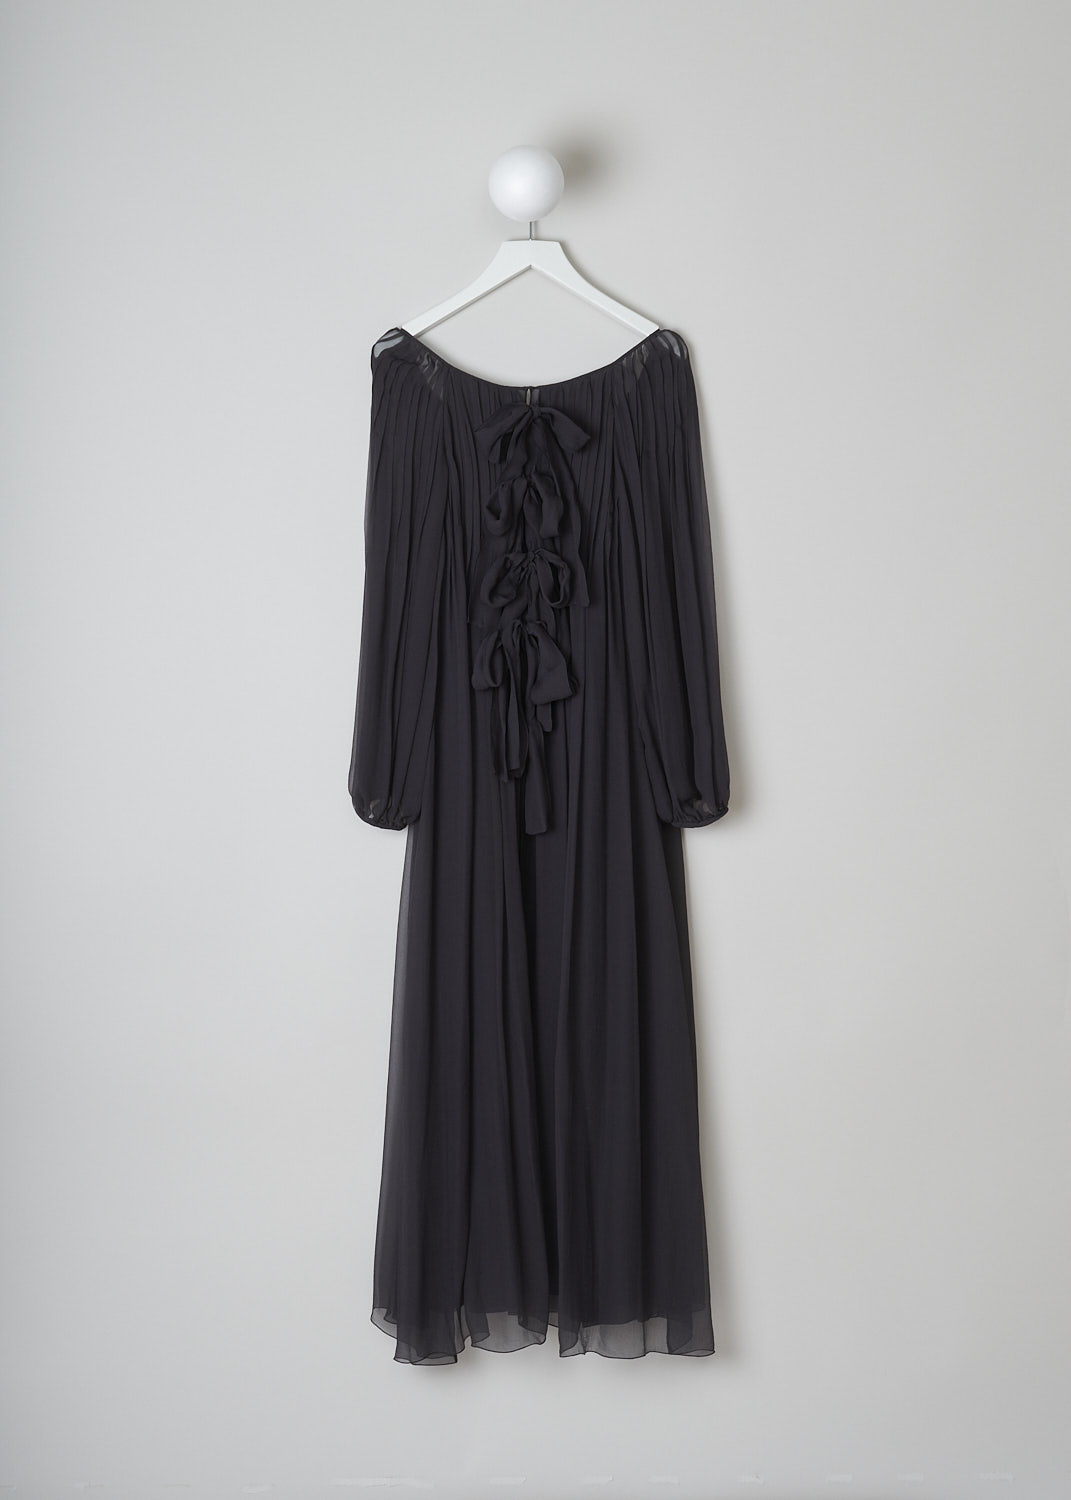 CHLOÃ‰ FLOWY ASH BLACK DRESS, CHC23SRO77101070_070, Black, Grey, Back, This ash black silk midi dress has a wide round neckline. The long semi sheer sleeves have gathered cuffs. The dress has a slip dress sewn in under the flowy sheer silk fabric. In the back, a hook-and-eye and four ties function as the closure. 
